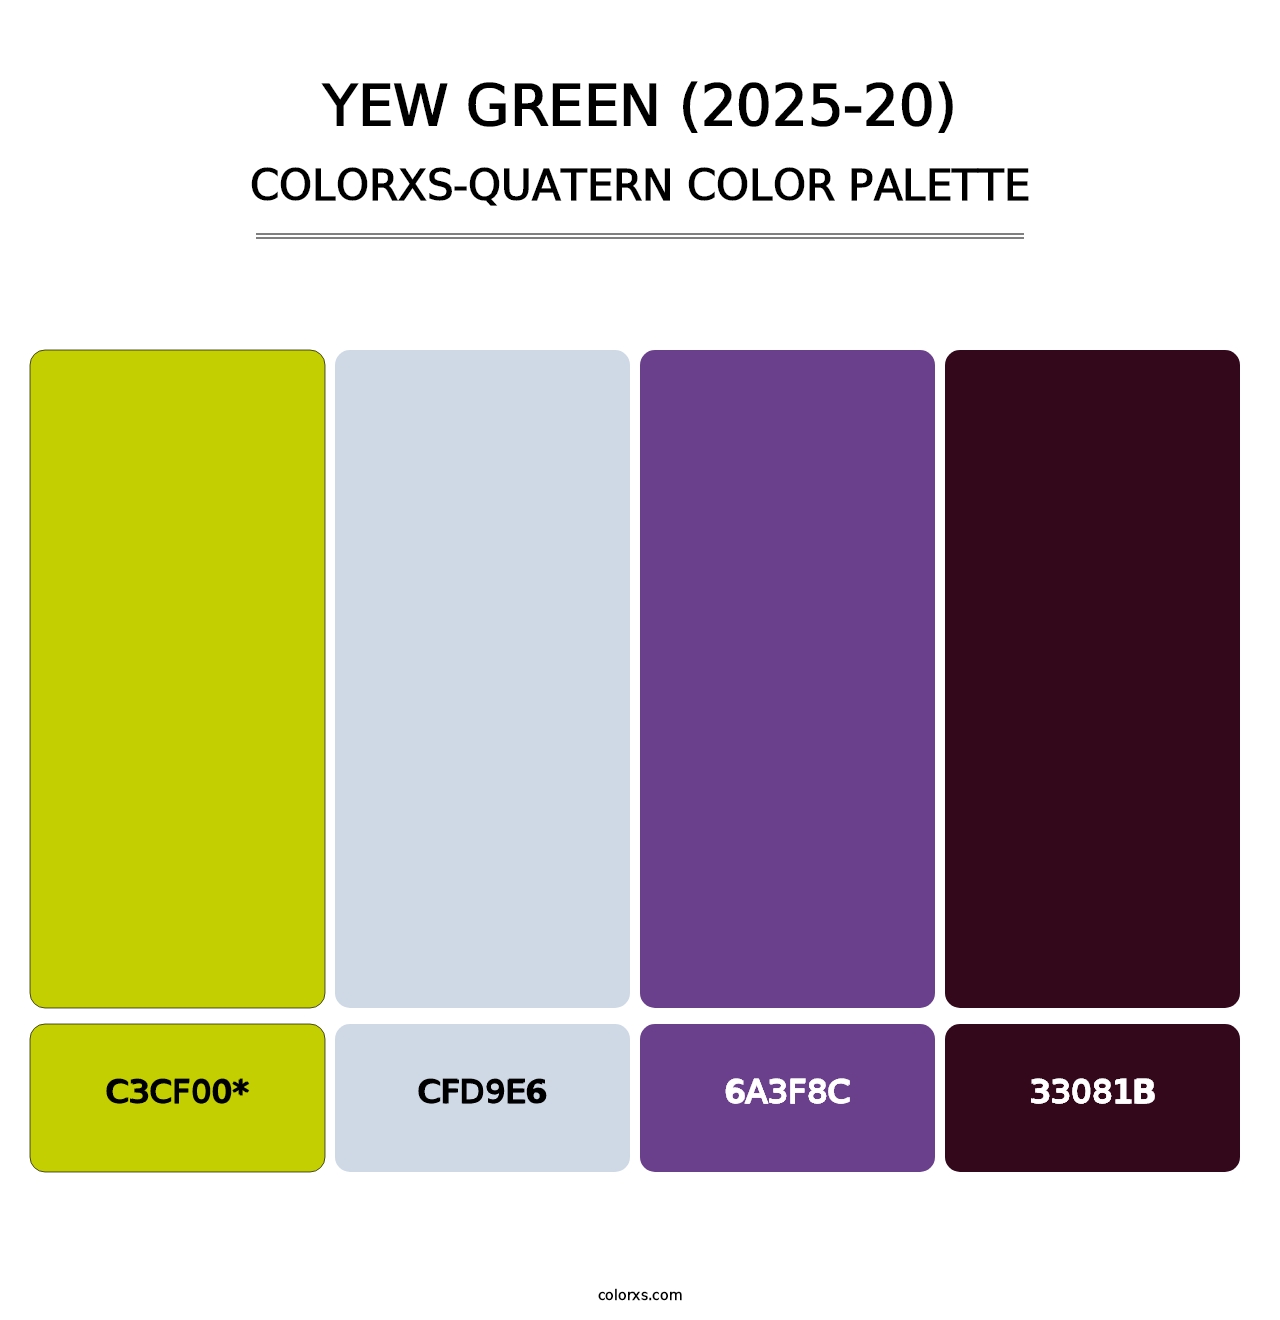 Yew Green (2025-20) - Colorxs Quatern Palette